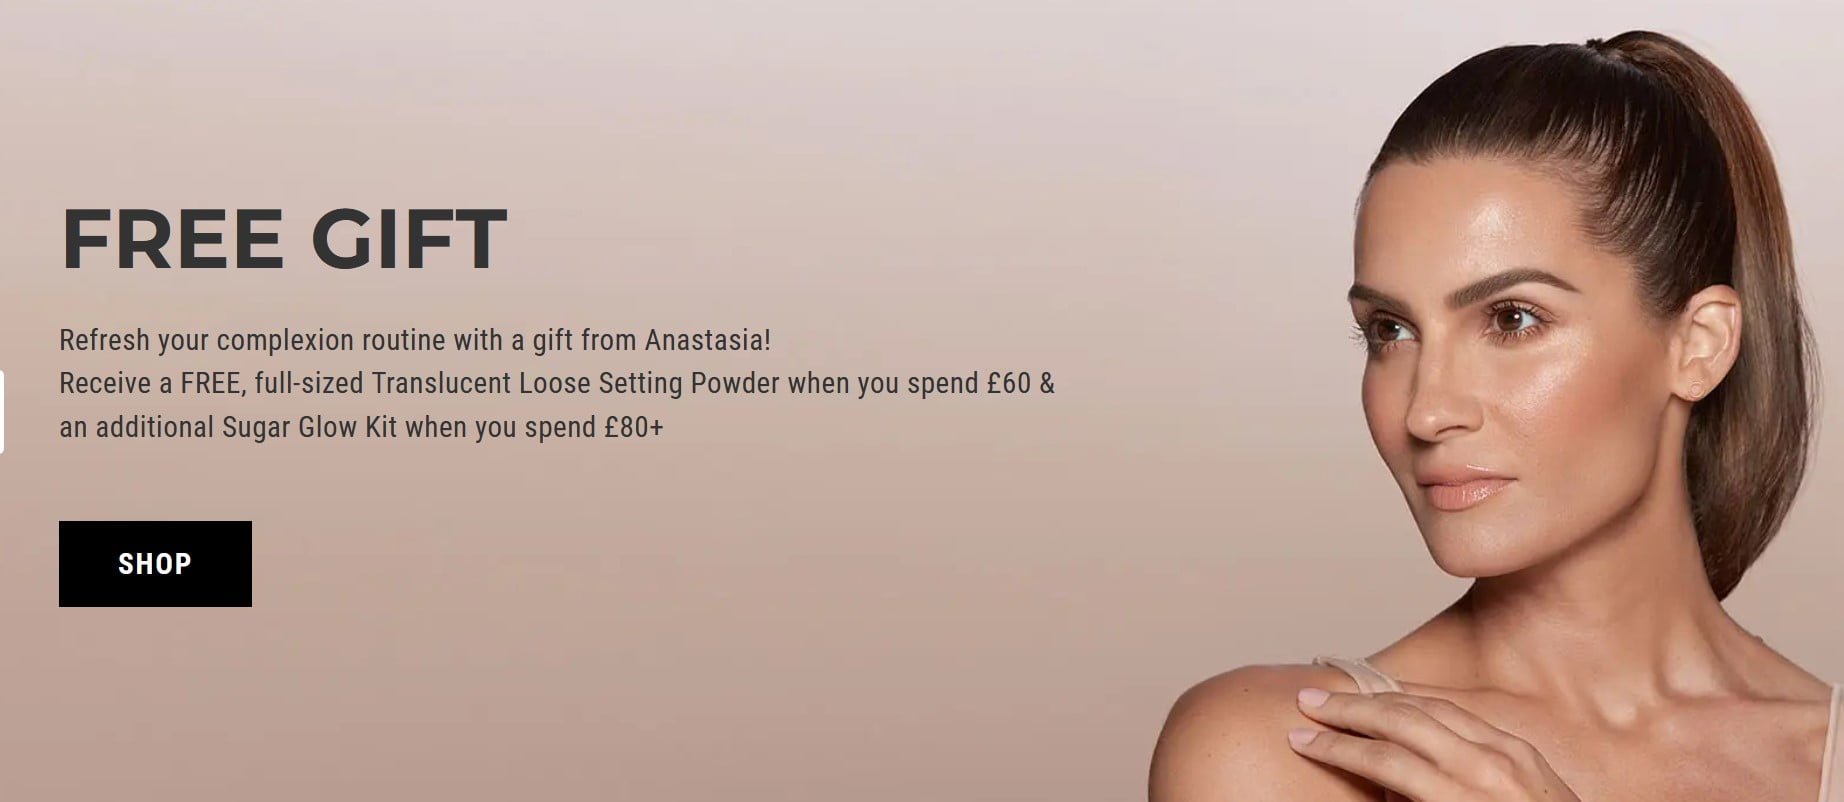 Free Loose Setting Powder Translucent when you spend £60 + Free Glow Kit Sugar when you spend £80 at Anastasia Beverly Hills